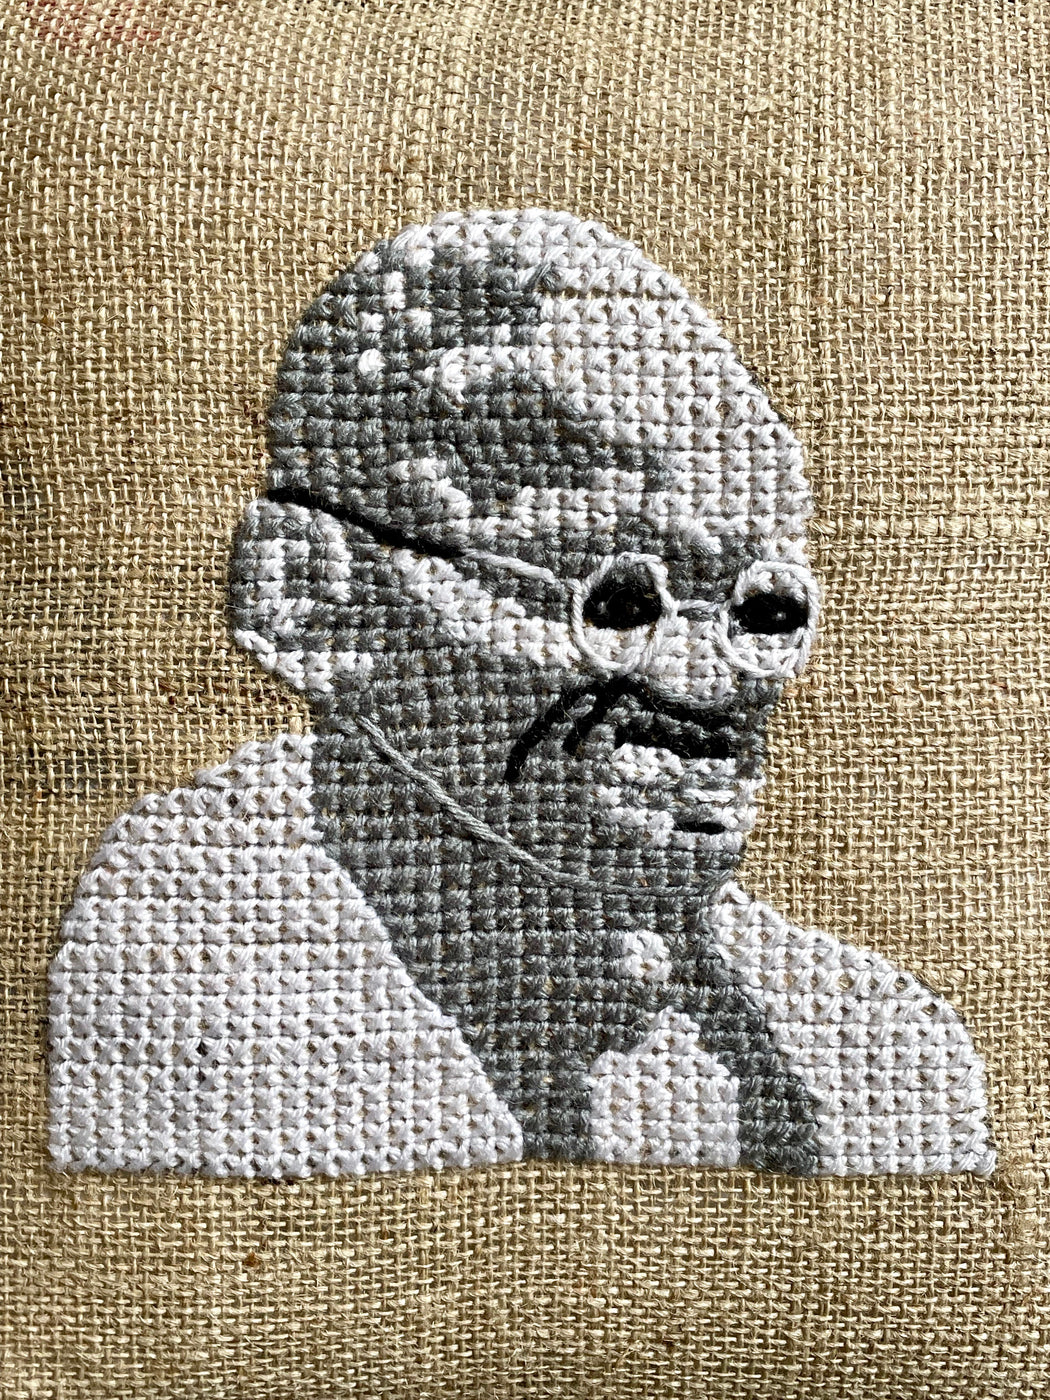 "Ghandi" Hand-Embroidered Pillow